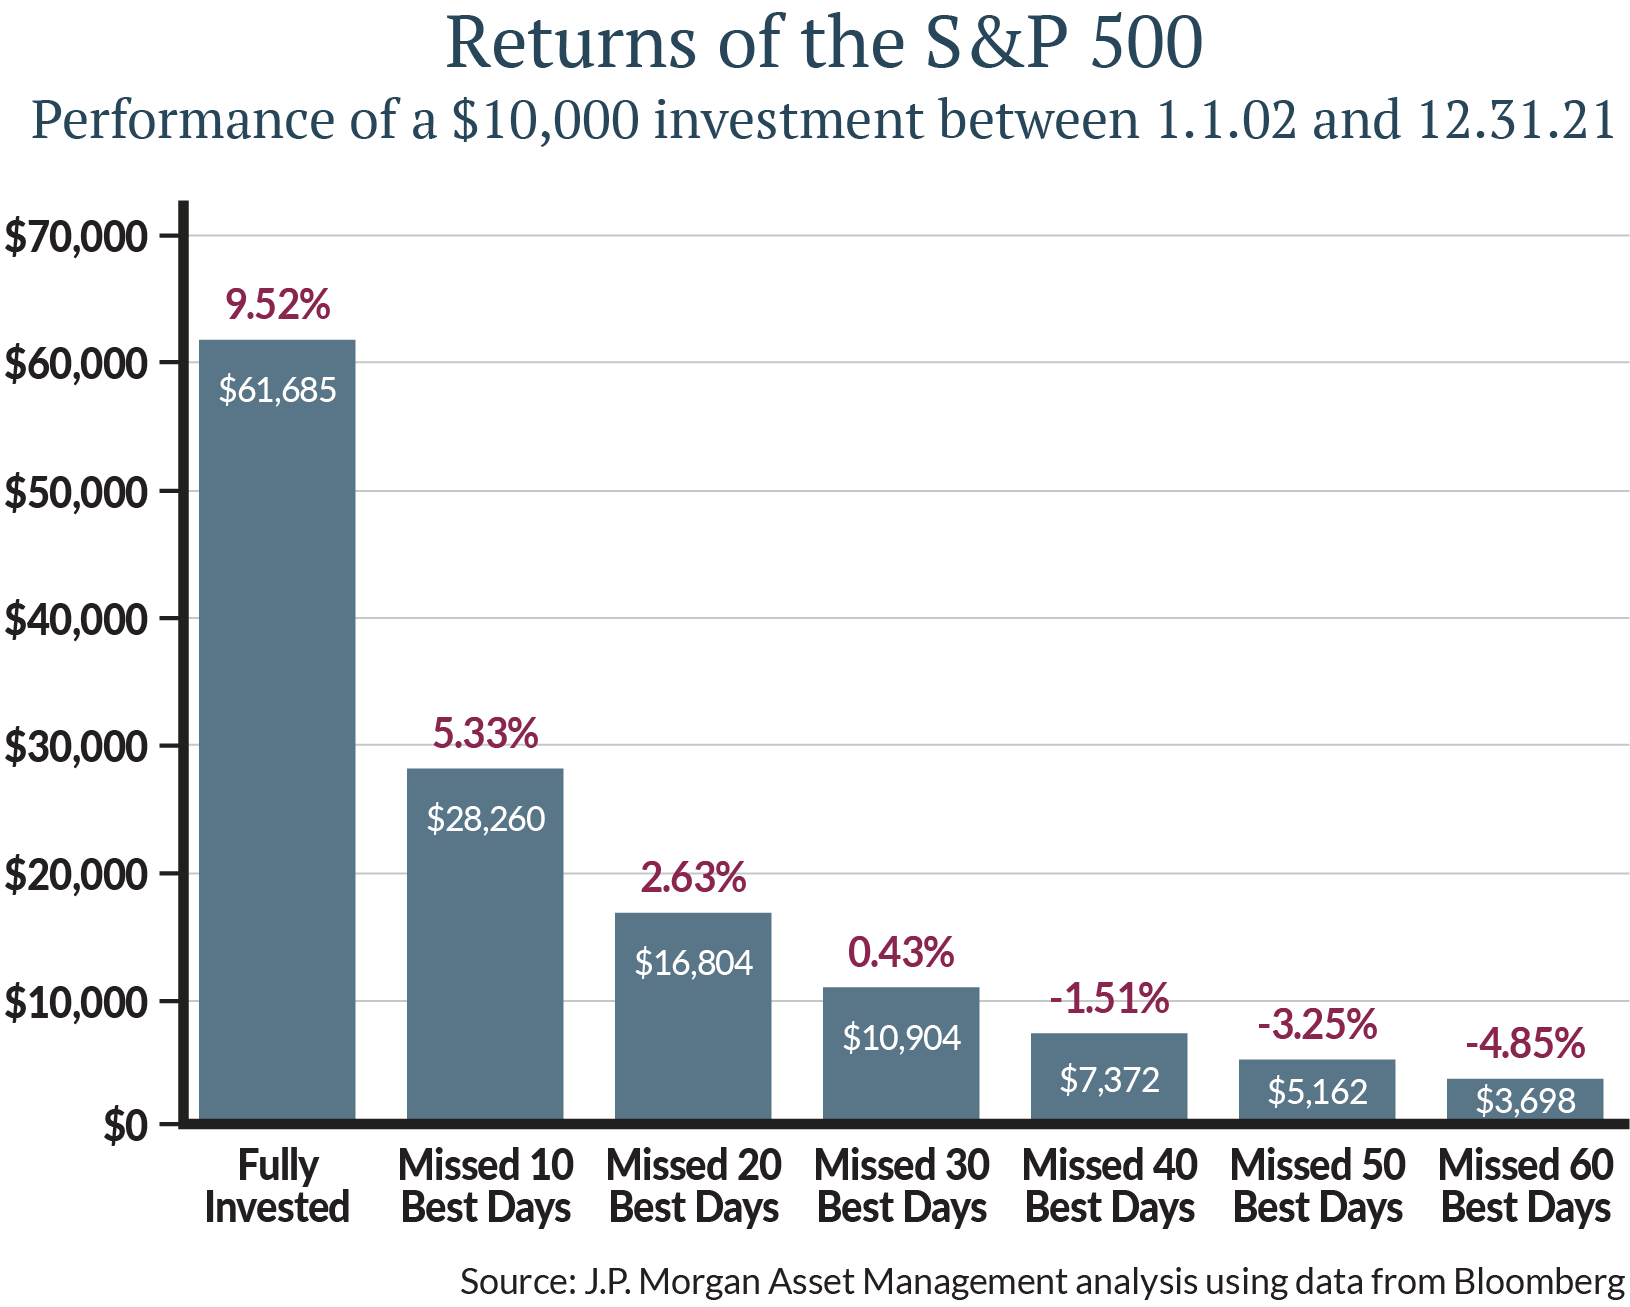 Exhibit 2 shows the returns of the S&P in 2021 and six of the best 10 days occurred within two weeks of the 10 worst days.